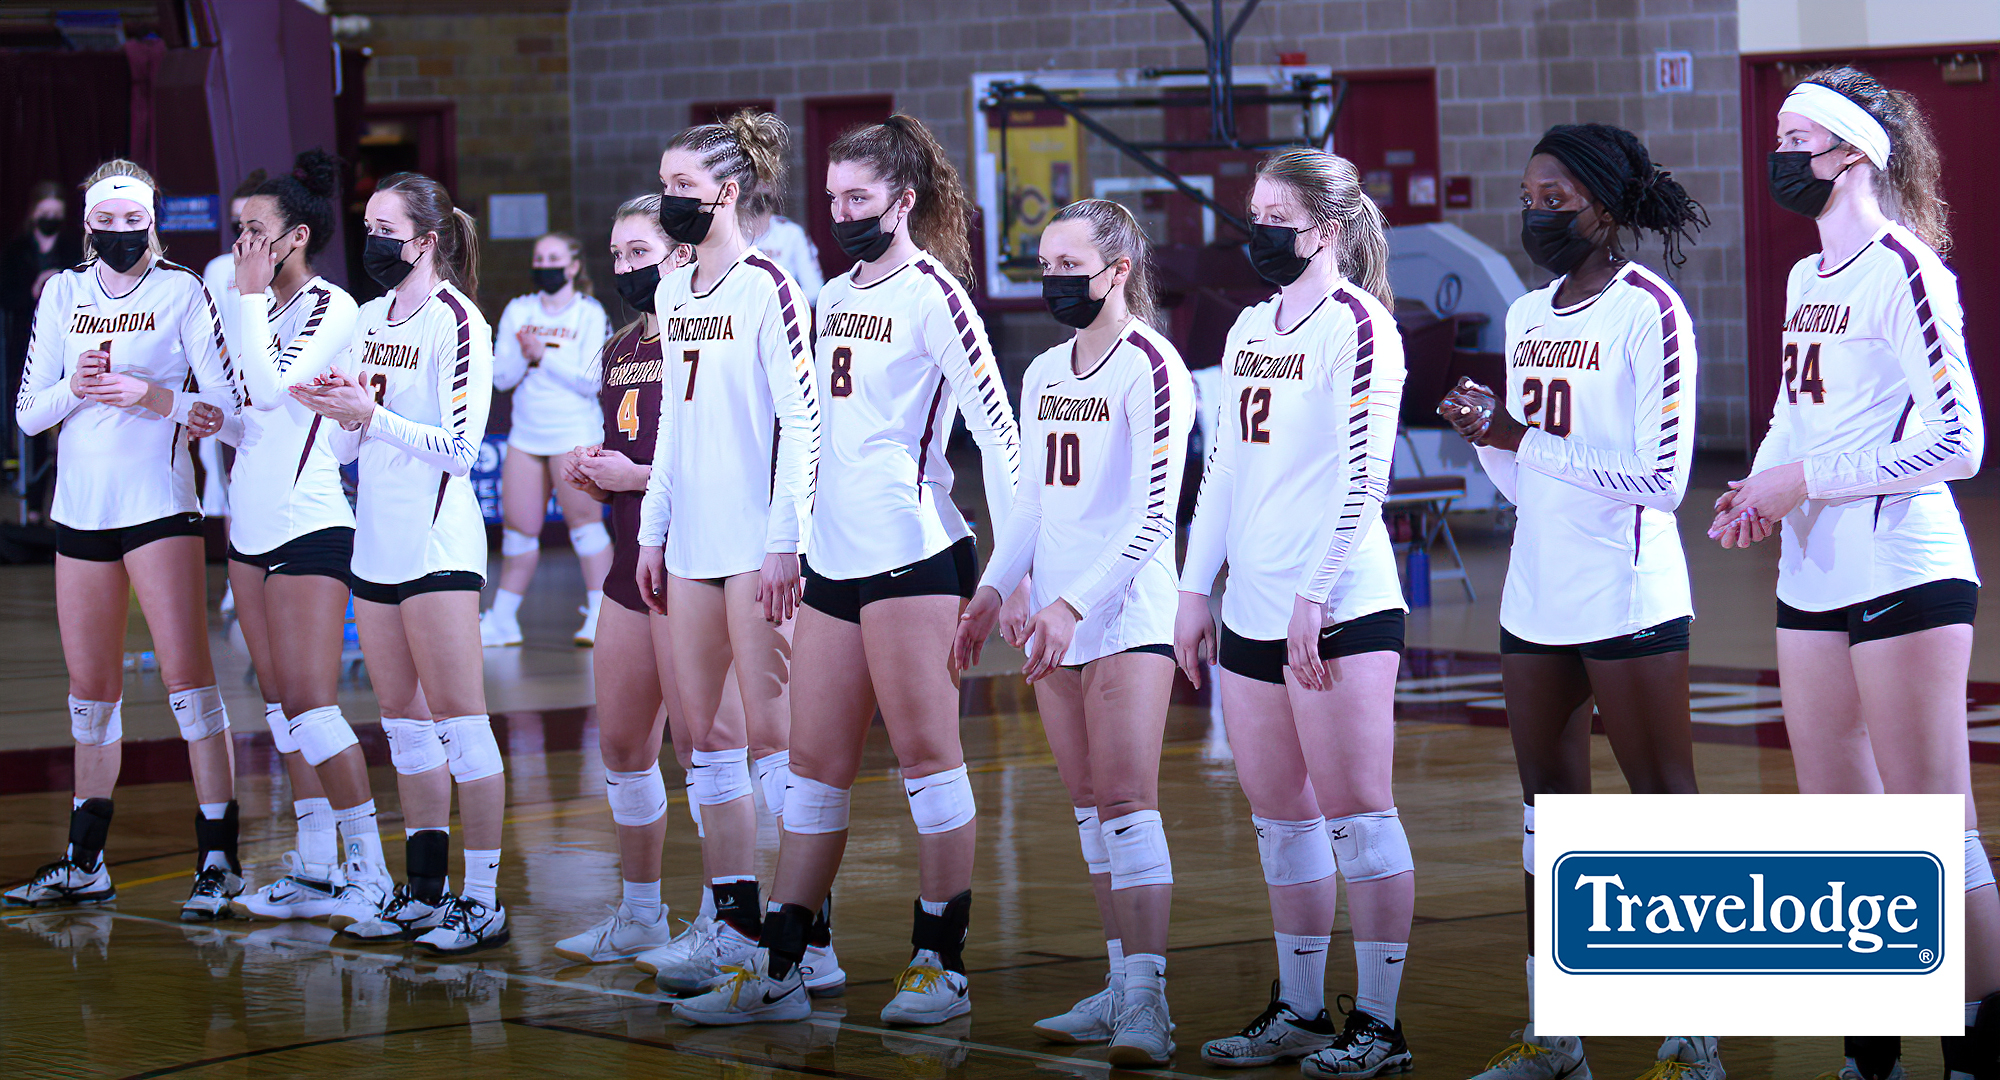 Concordia lines up before the start of their season opener against Bethel. The Cobbers hosted the first game of the season on Saturday after the fall season was delayed due to Covid.